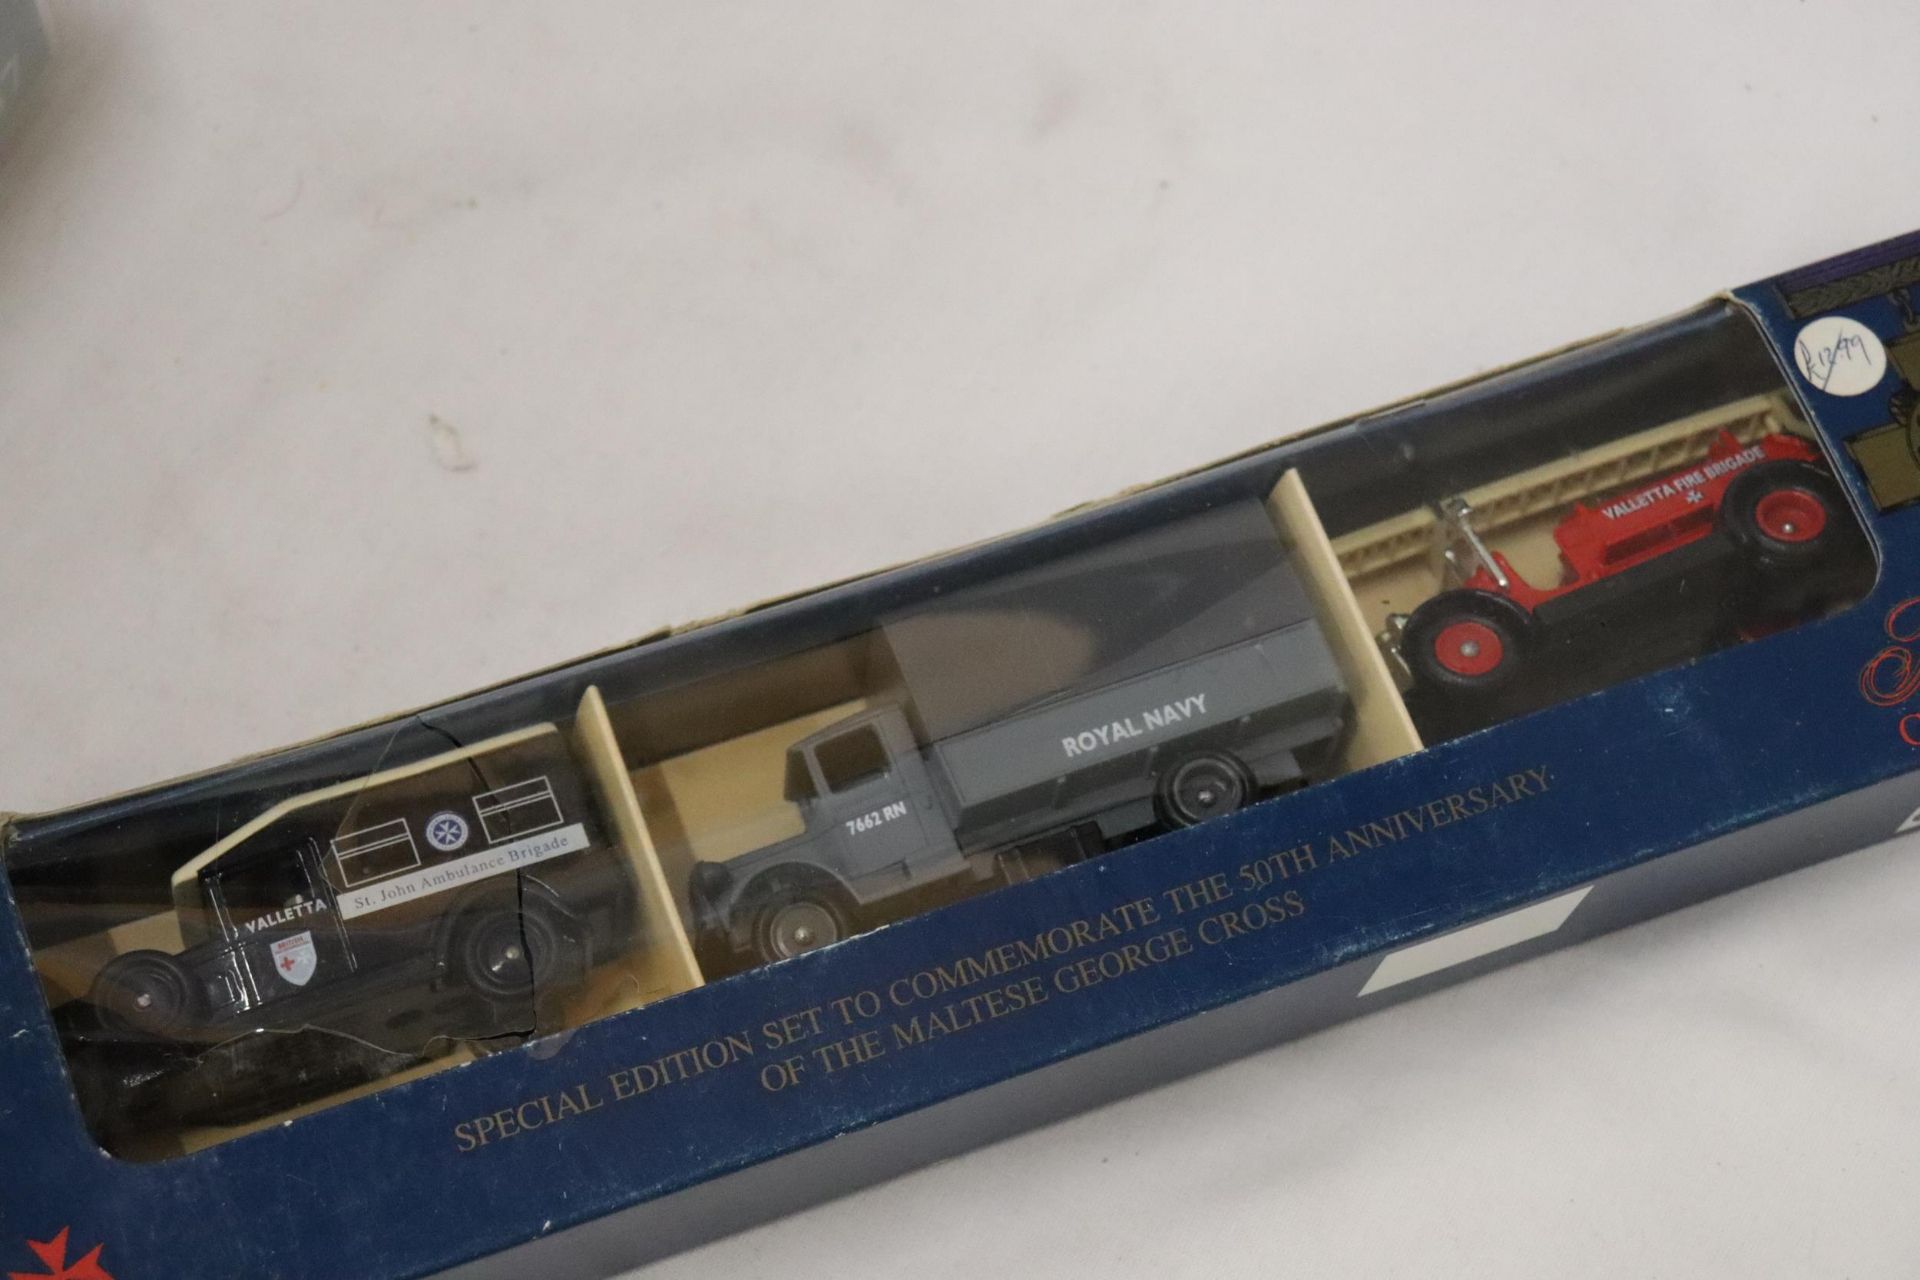 TWO SPECIAL EDITION SETS OF DIE-CAST MILITARY VEHICLES, ONE LLEDOAND ONE MALTA, RAF, RFC, GEORGE - Image 7 of 8